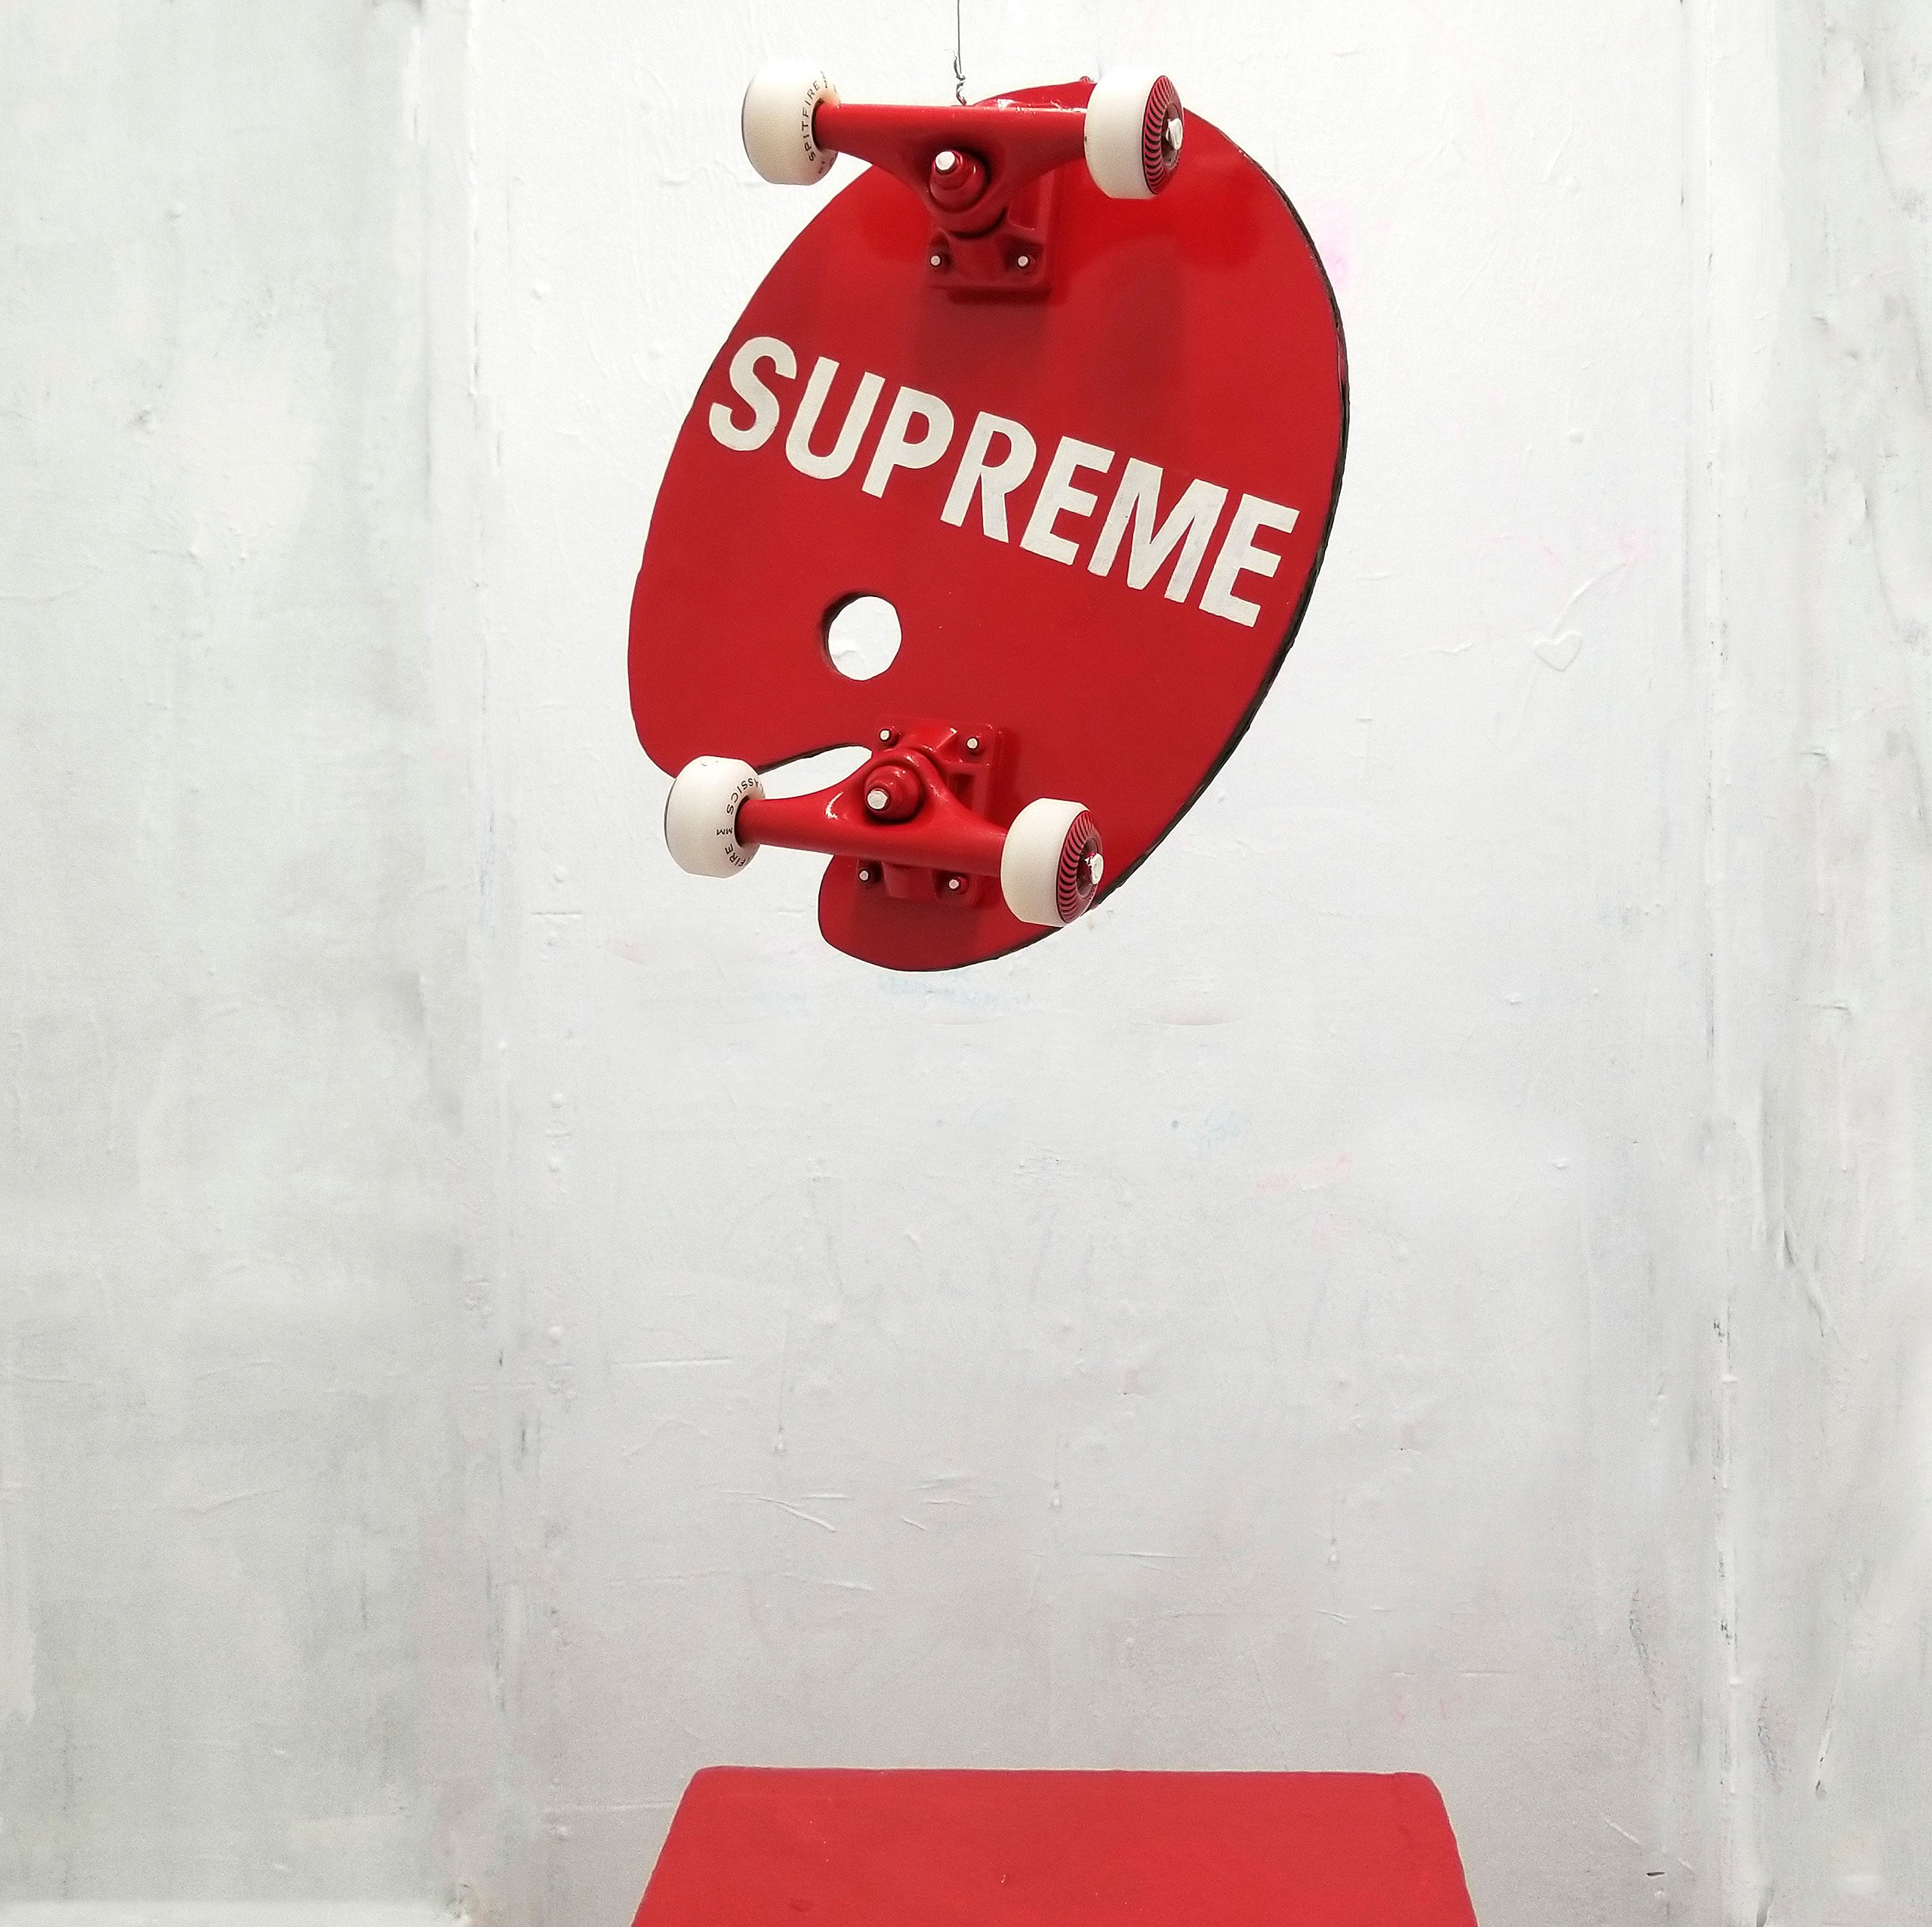 An Artist Slapped Wheels and Supreme Logo on Artist's Palette. Called ' Supreme Mundi,' Now Become the World's Most Skateboard